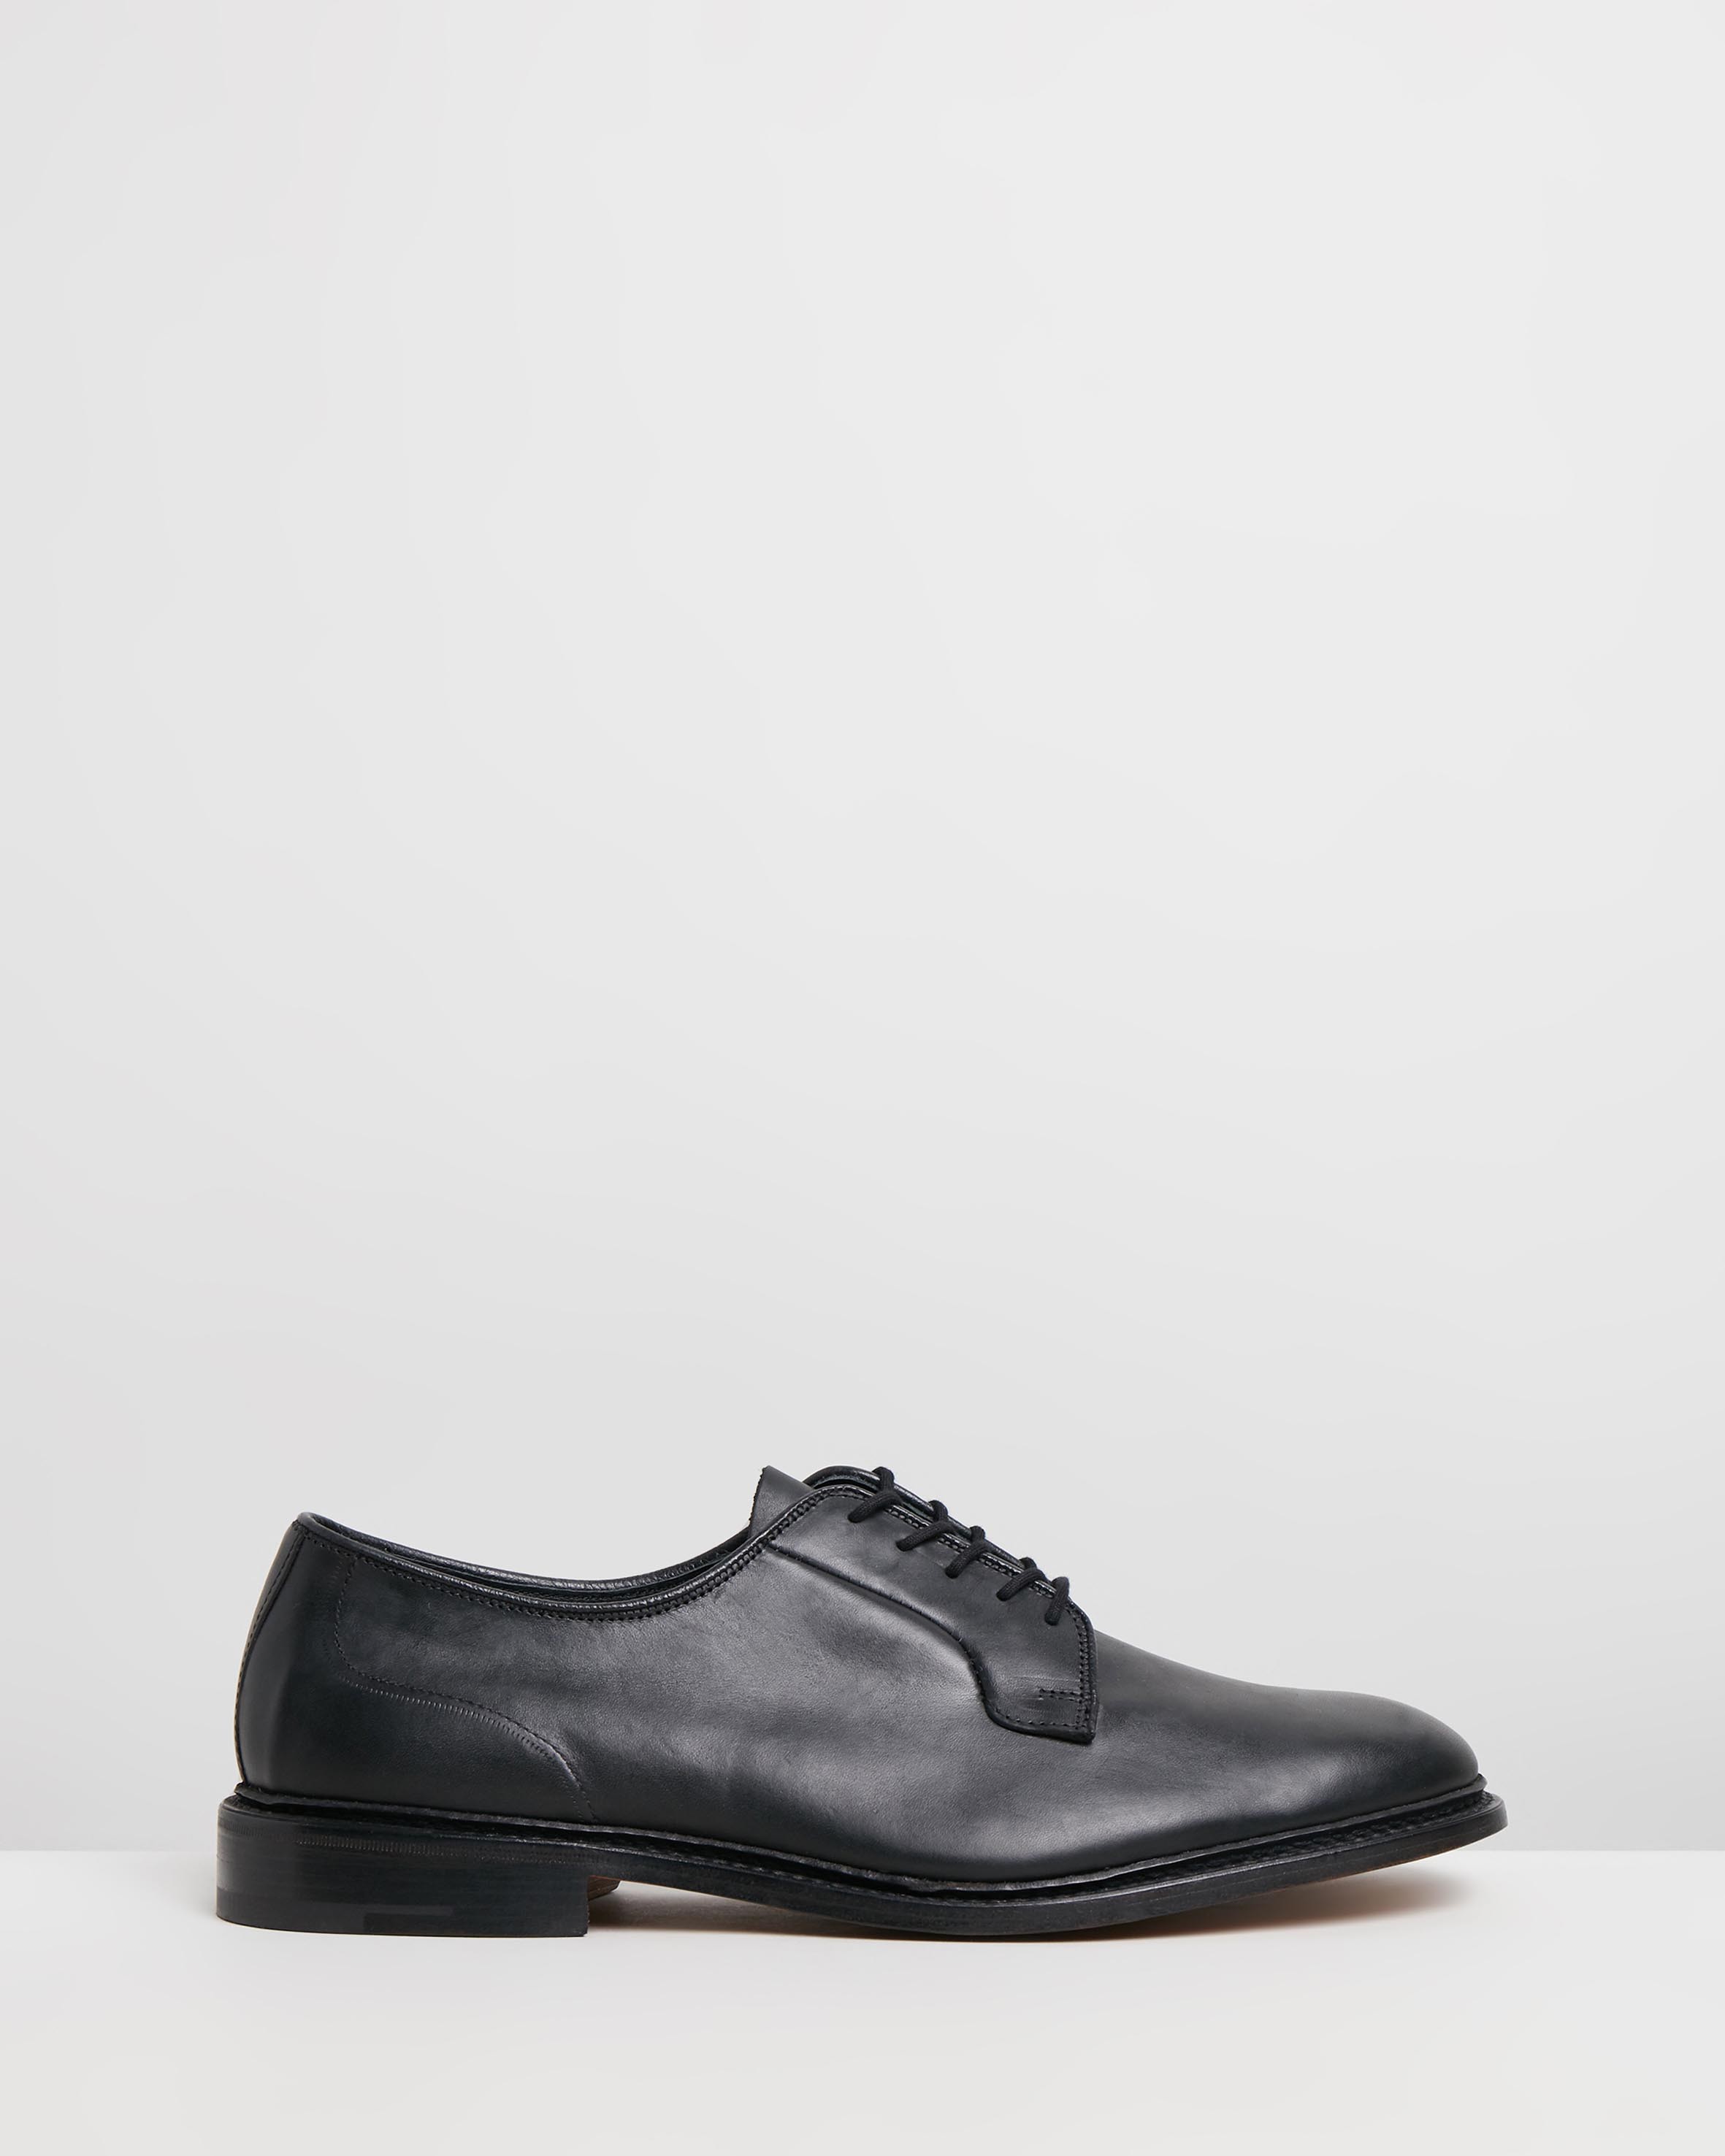 Robert Derby Shoes Olivvia Black Oily by Trickers | ShoeSales